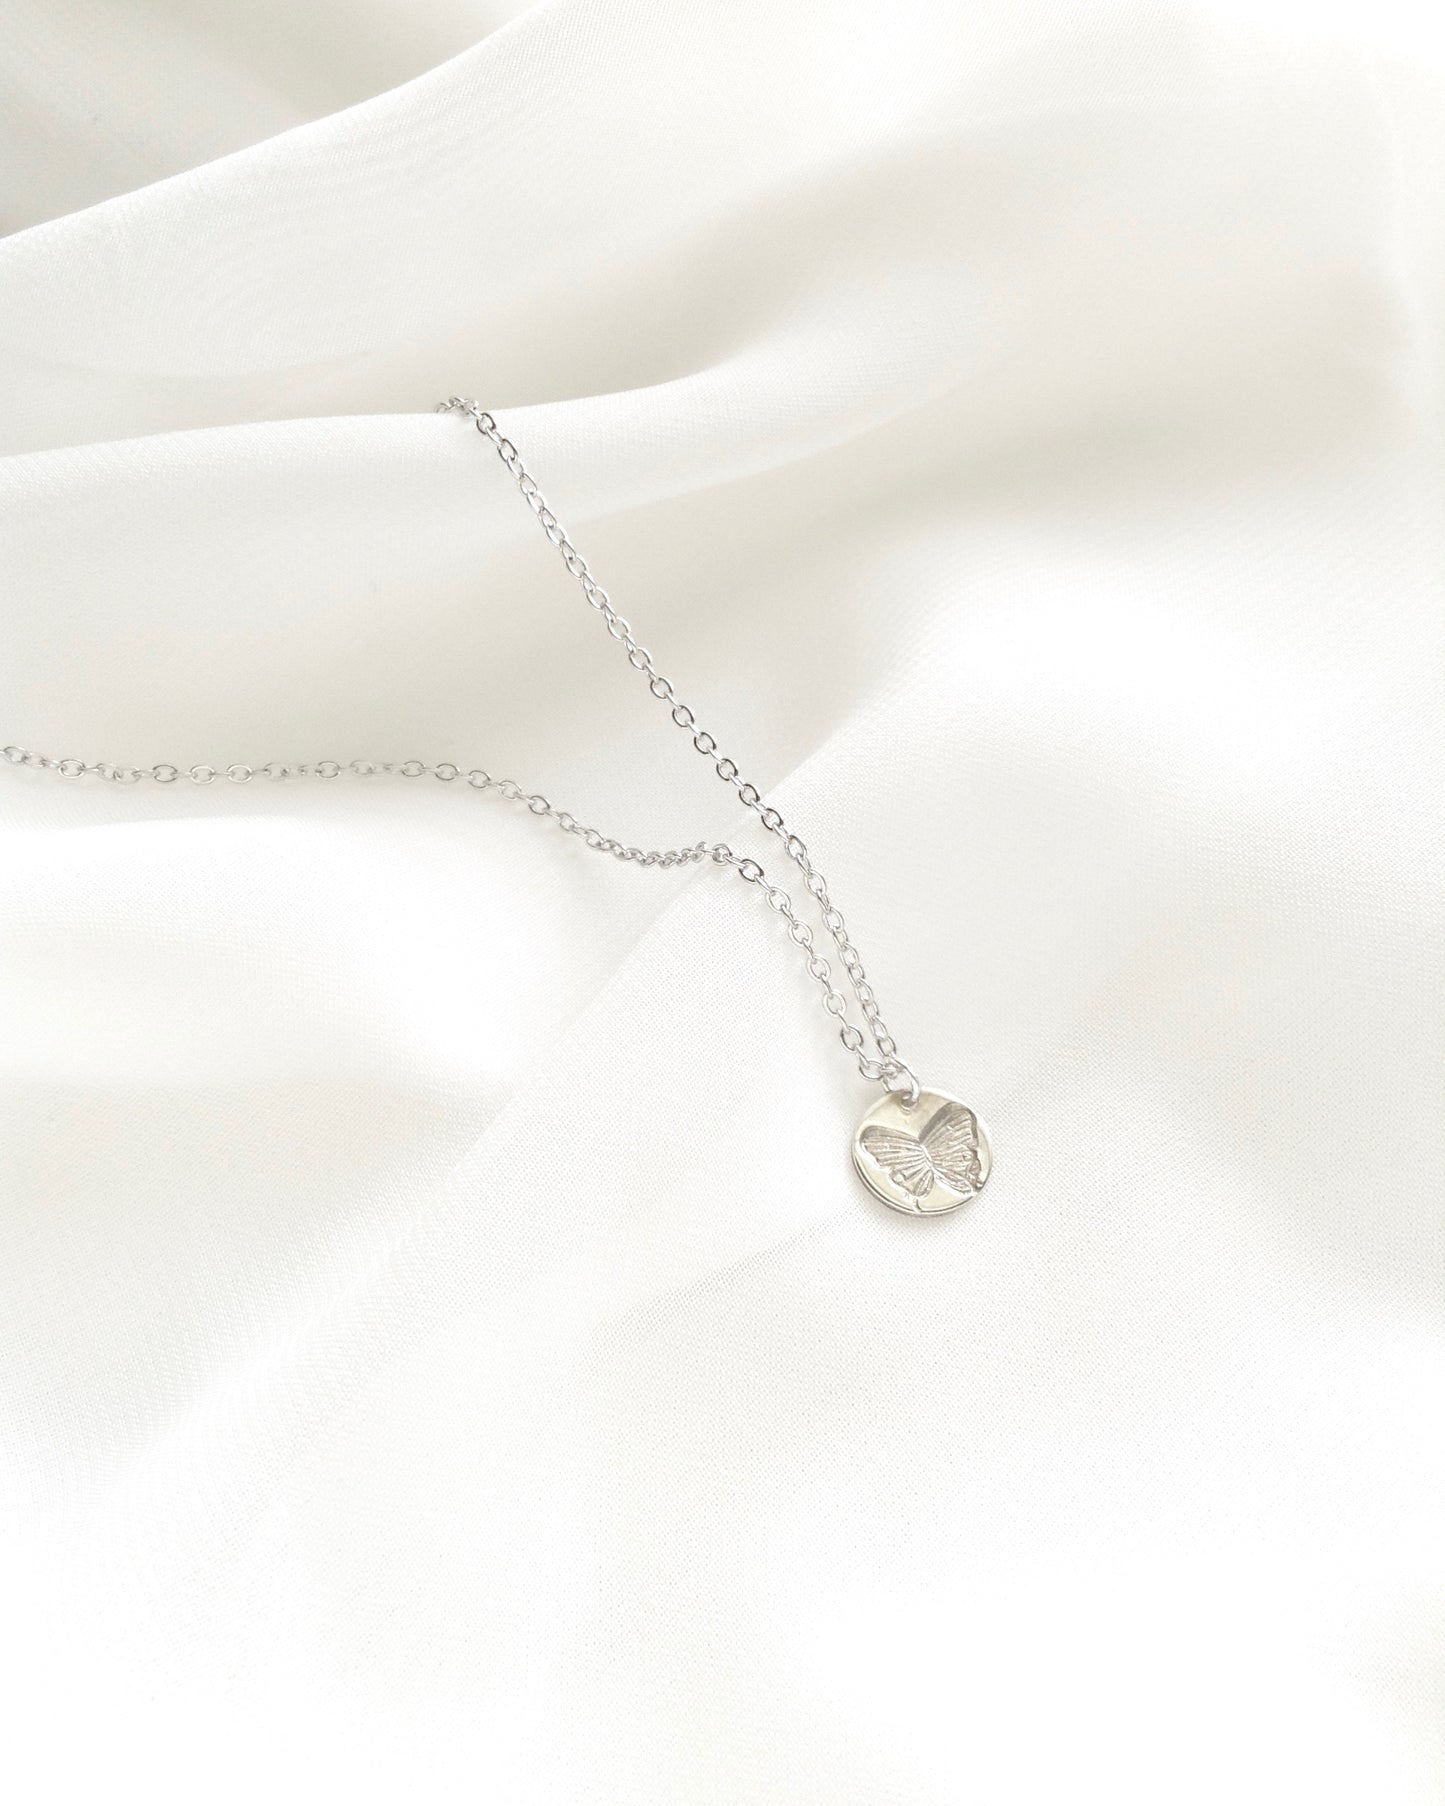 Dainty Everyday Butterfly Necklace in Gold Filled or Sterling Silver | IB Jewelry